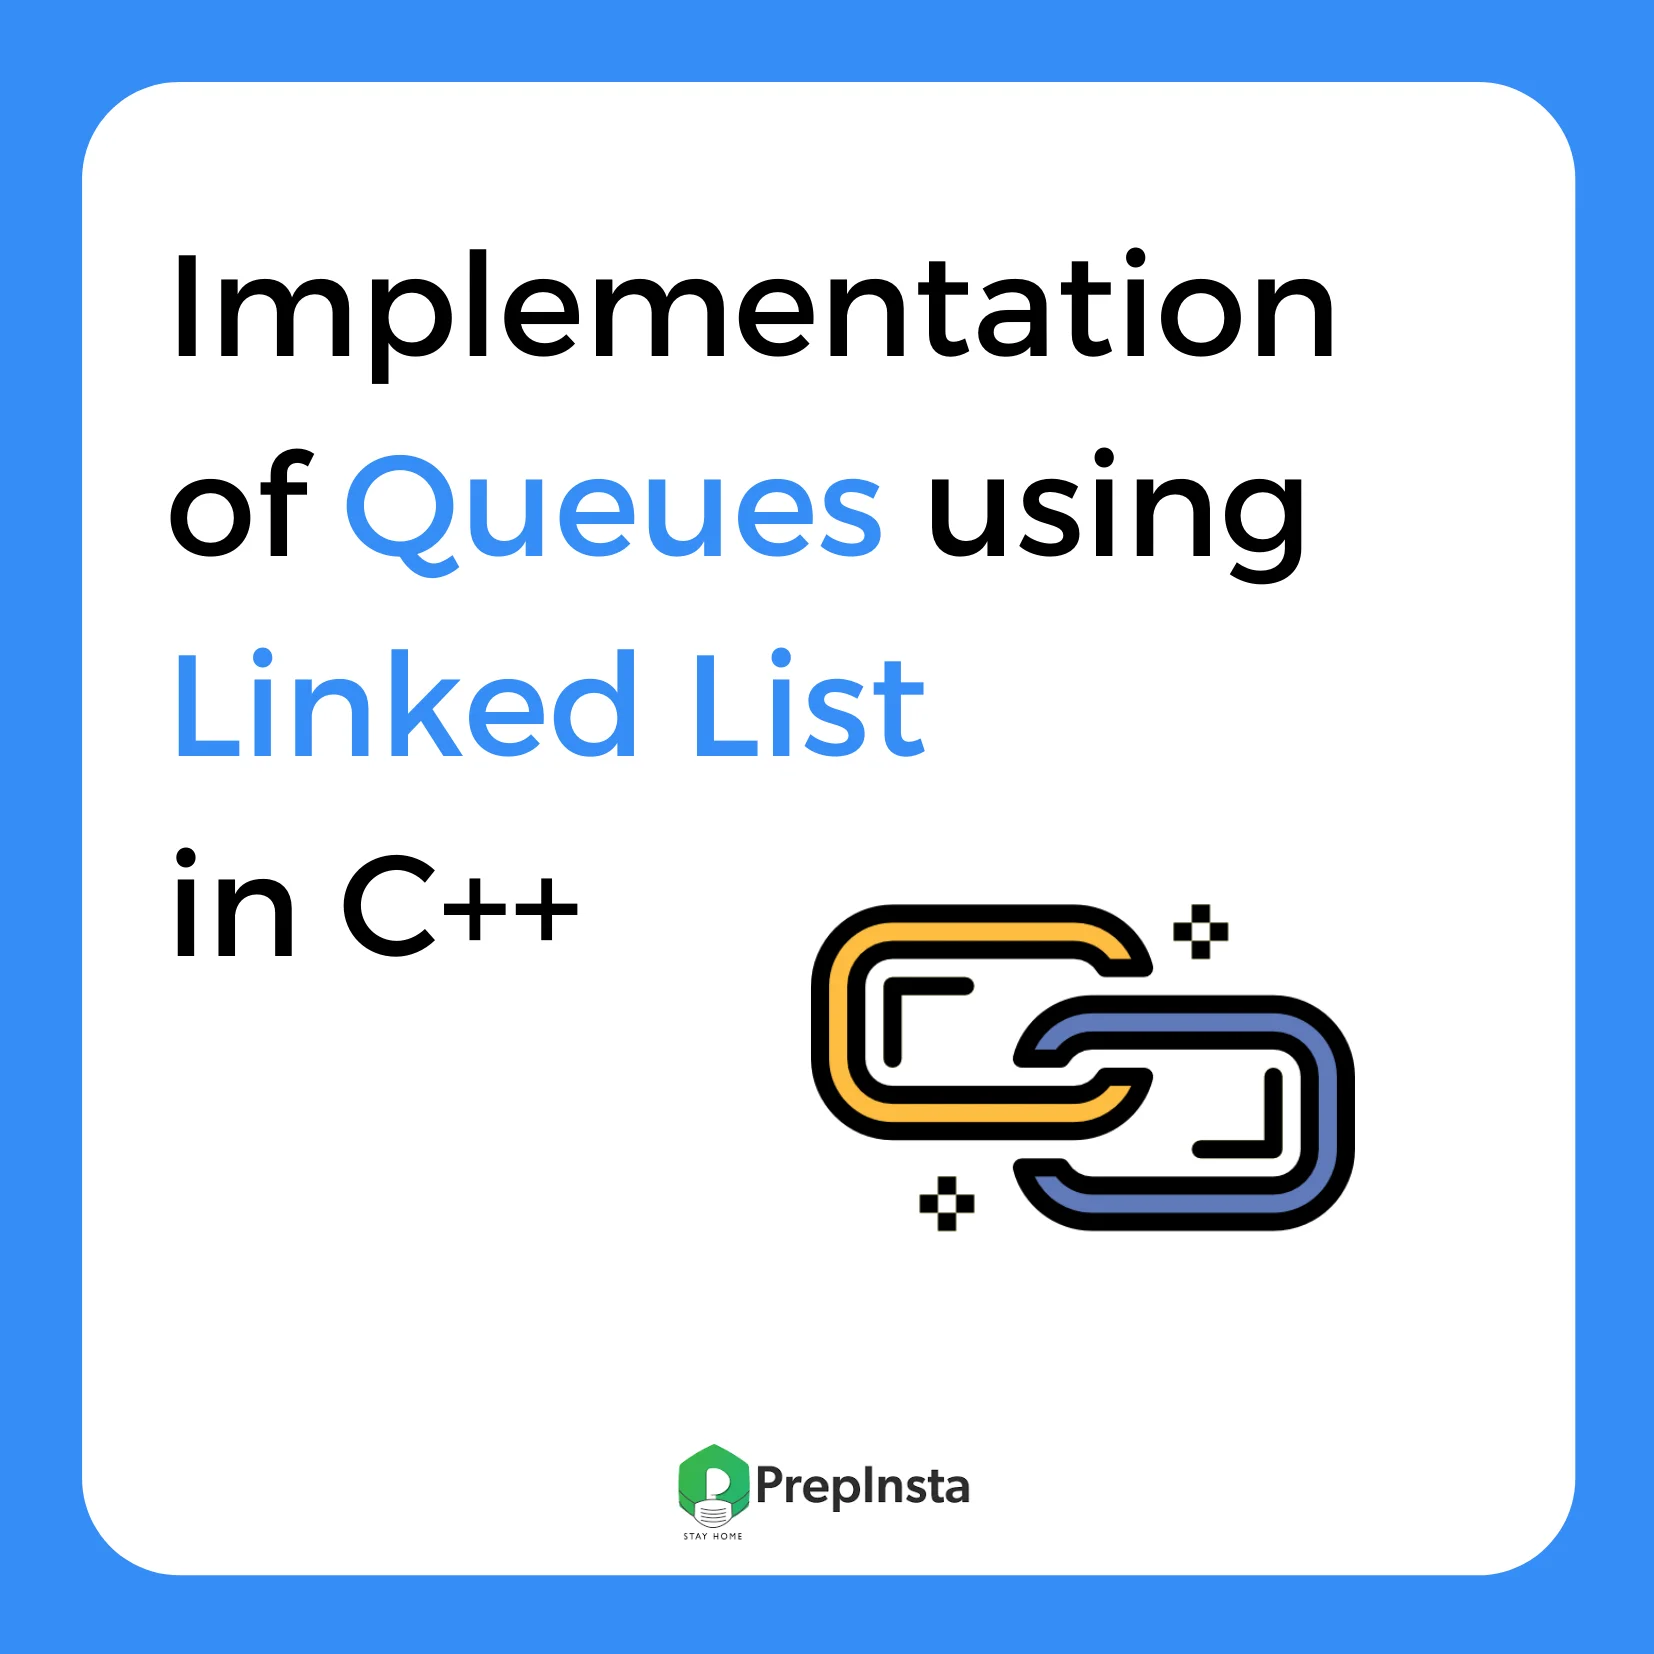 Implementation of Queues using Linked List in C++